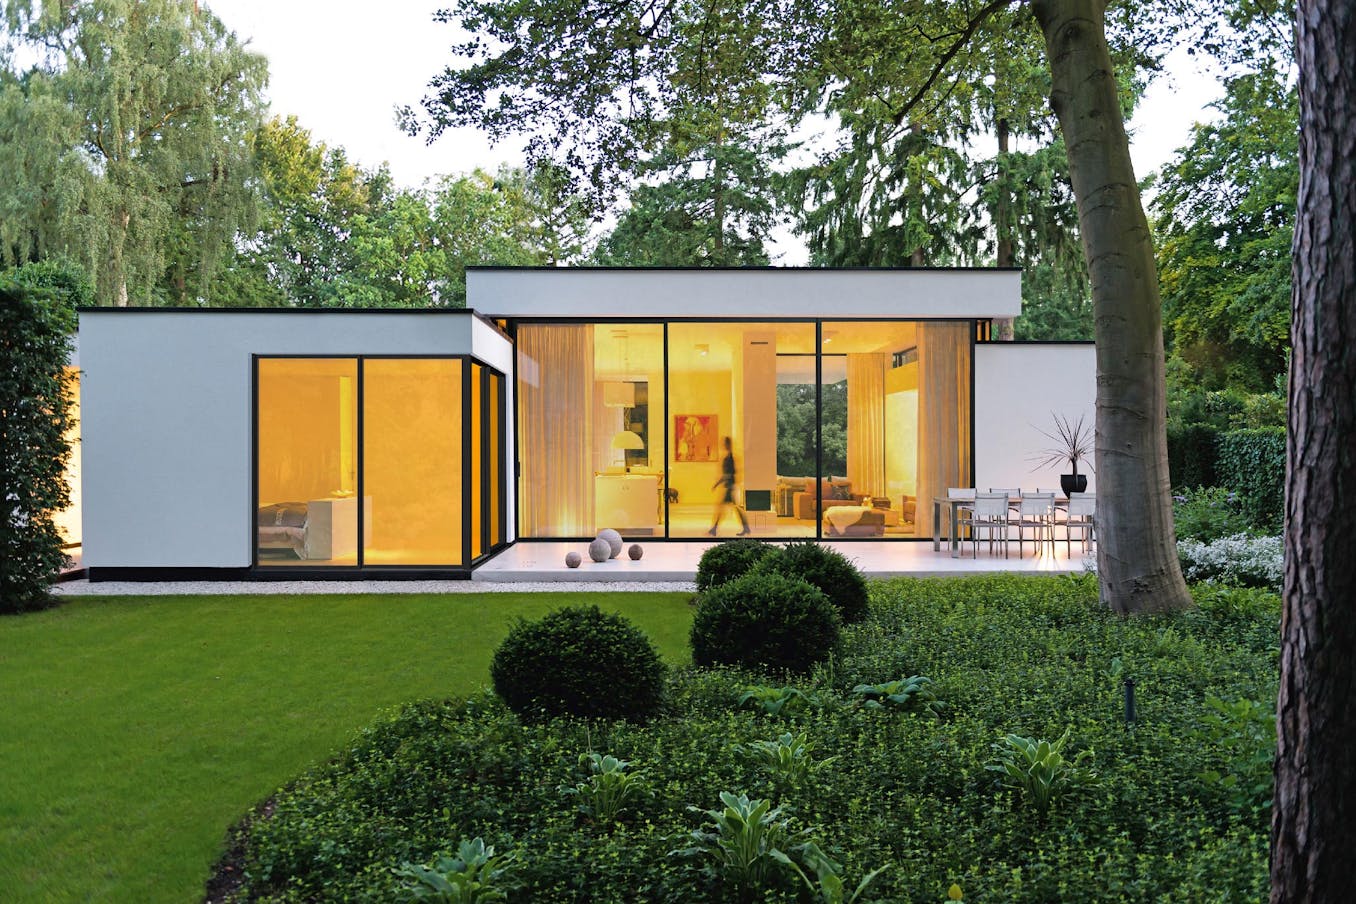 cero minimal moveable glass walls - opening exterior